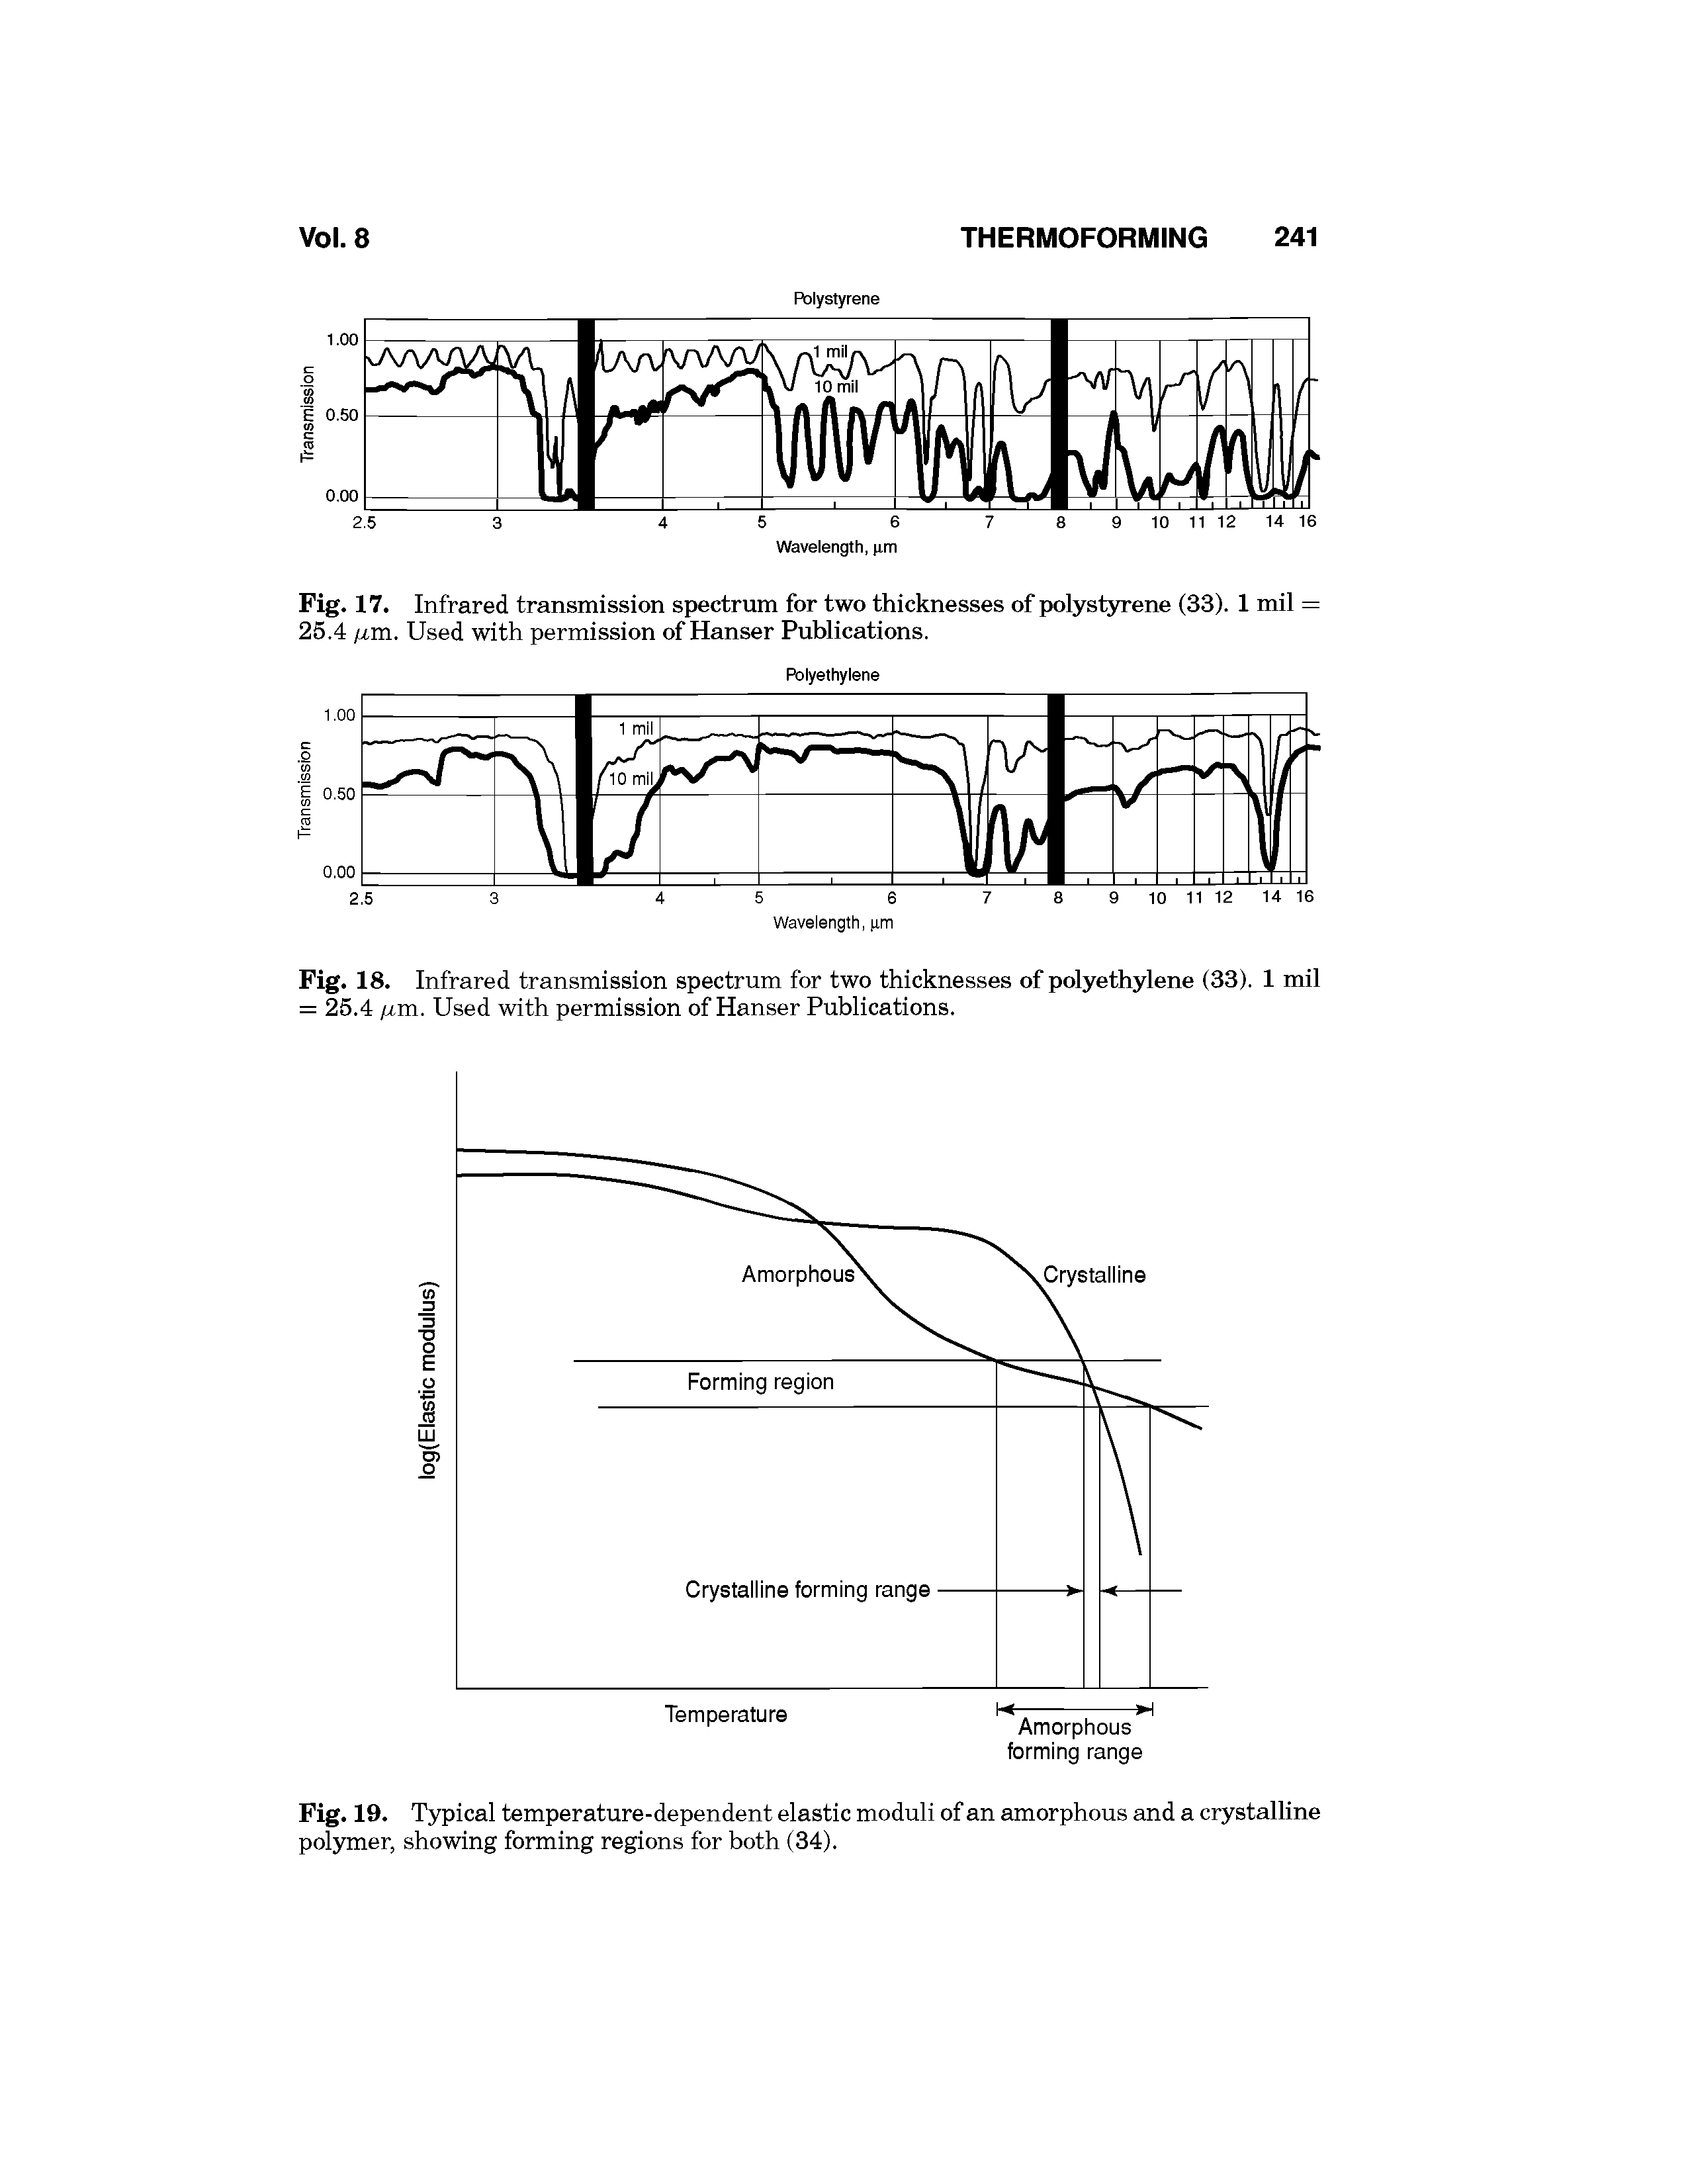 Fig. 17. Infrared transmission spectrum for two thicknesses of polystyrene (33). 1 mil 25.4 jxm. Used with permission of Hanser Publications.